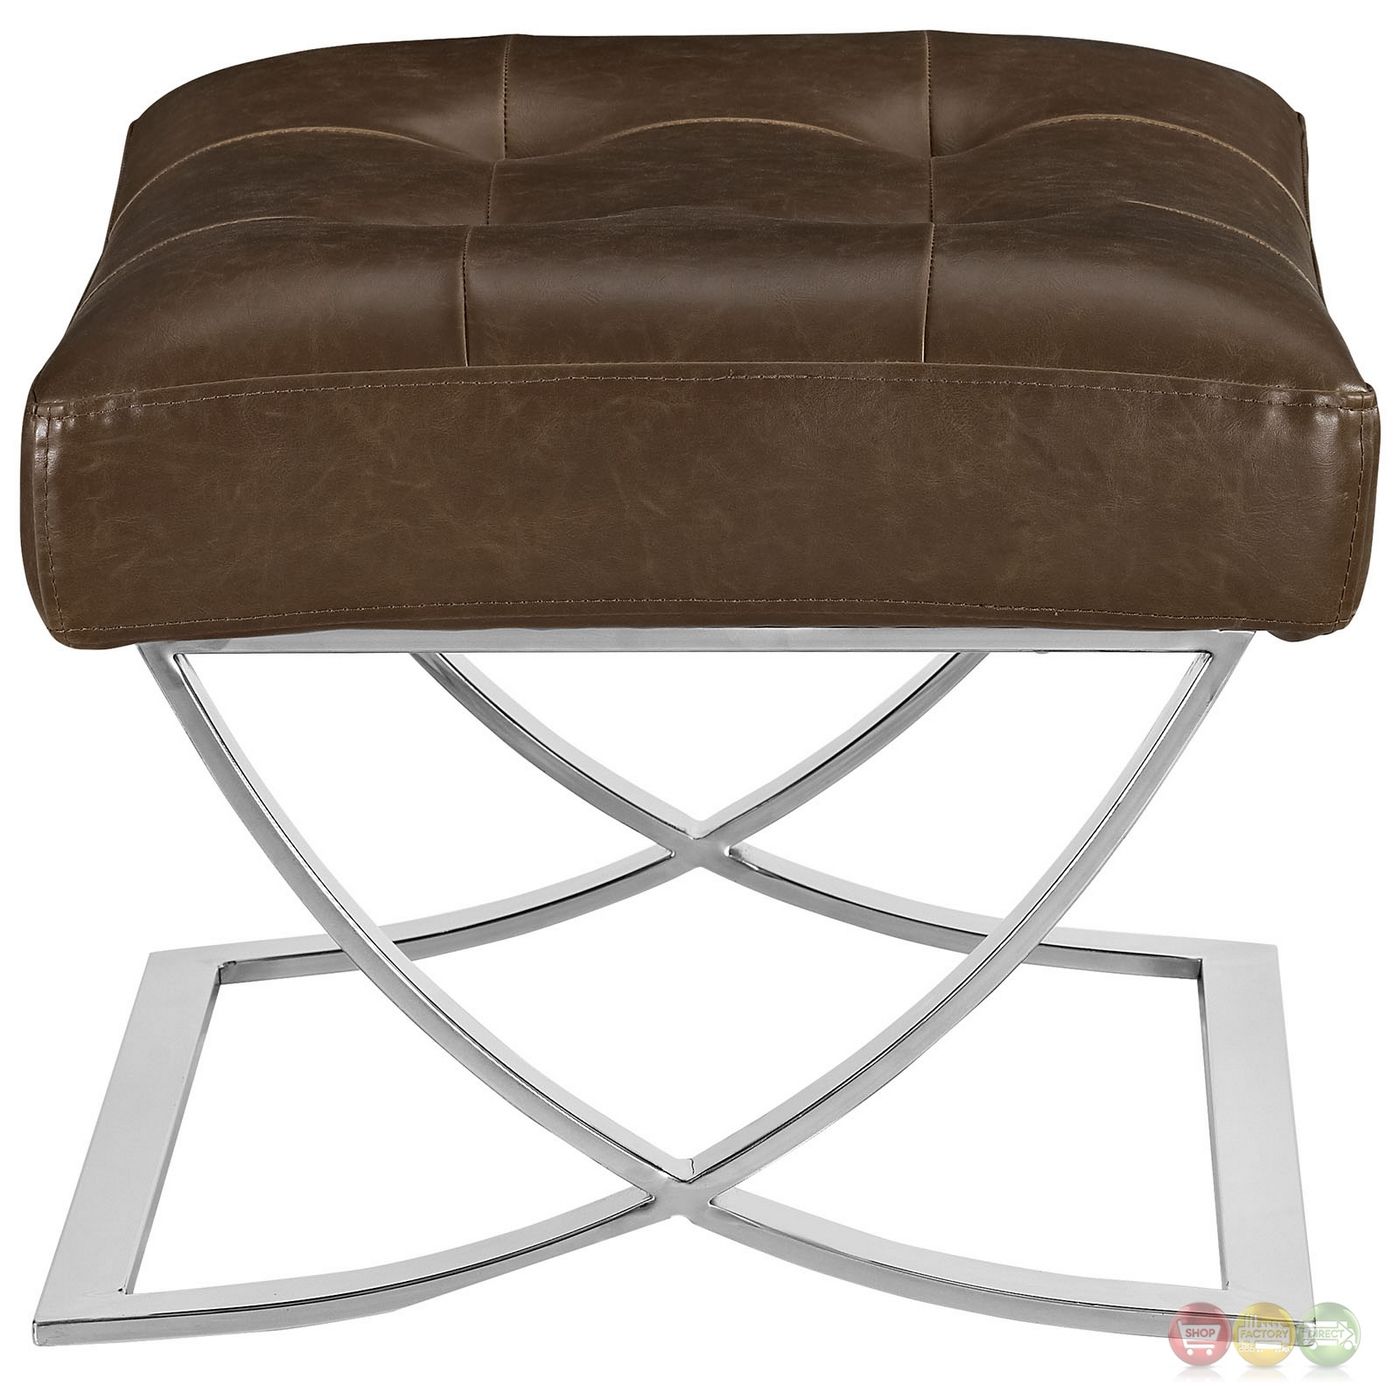 Slope Modern Button Tufted Vinyl Ottoman With Chrome Base, Brown Inside Brown And Gray Button Tufted Ottomans (View 13 of 20)